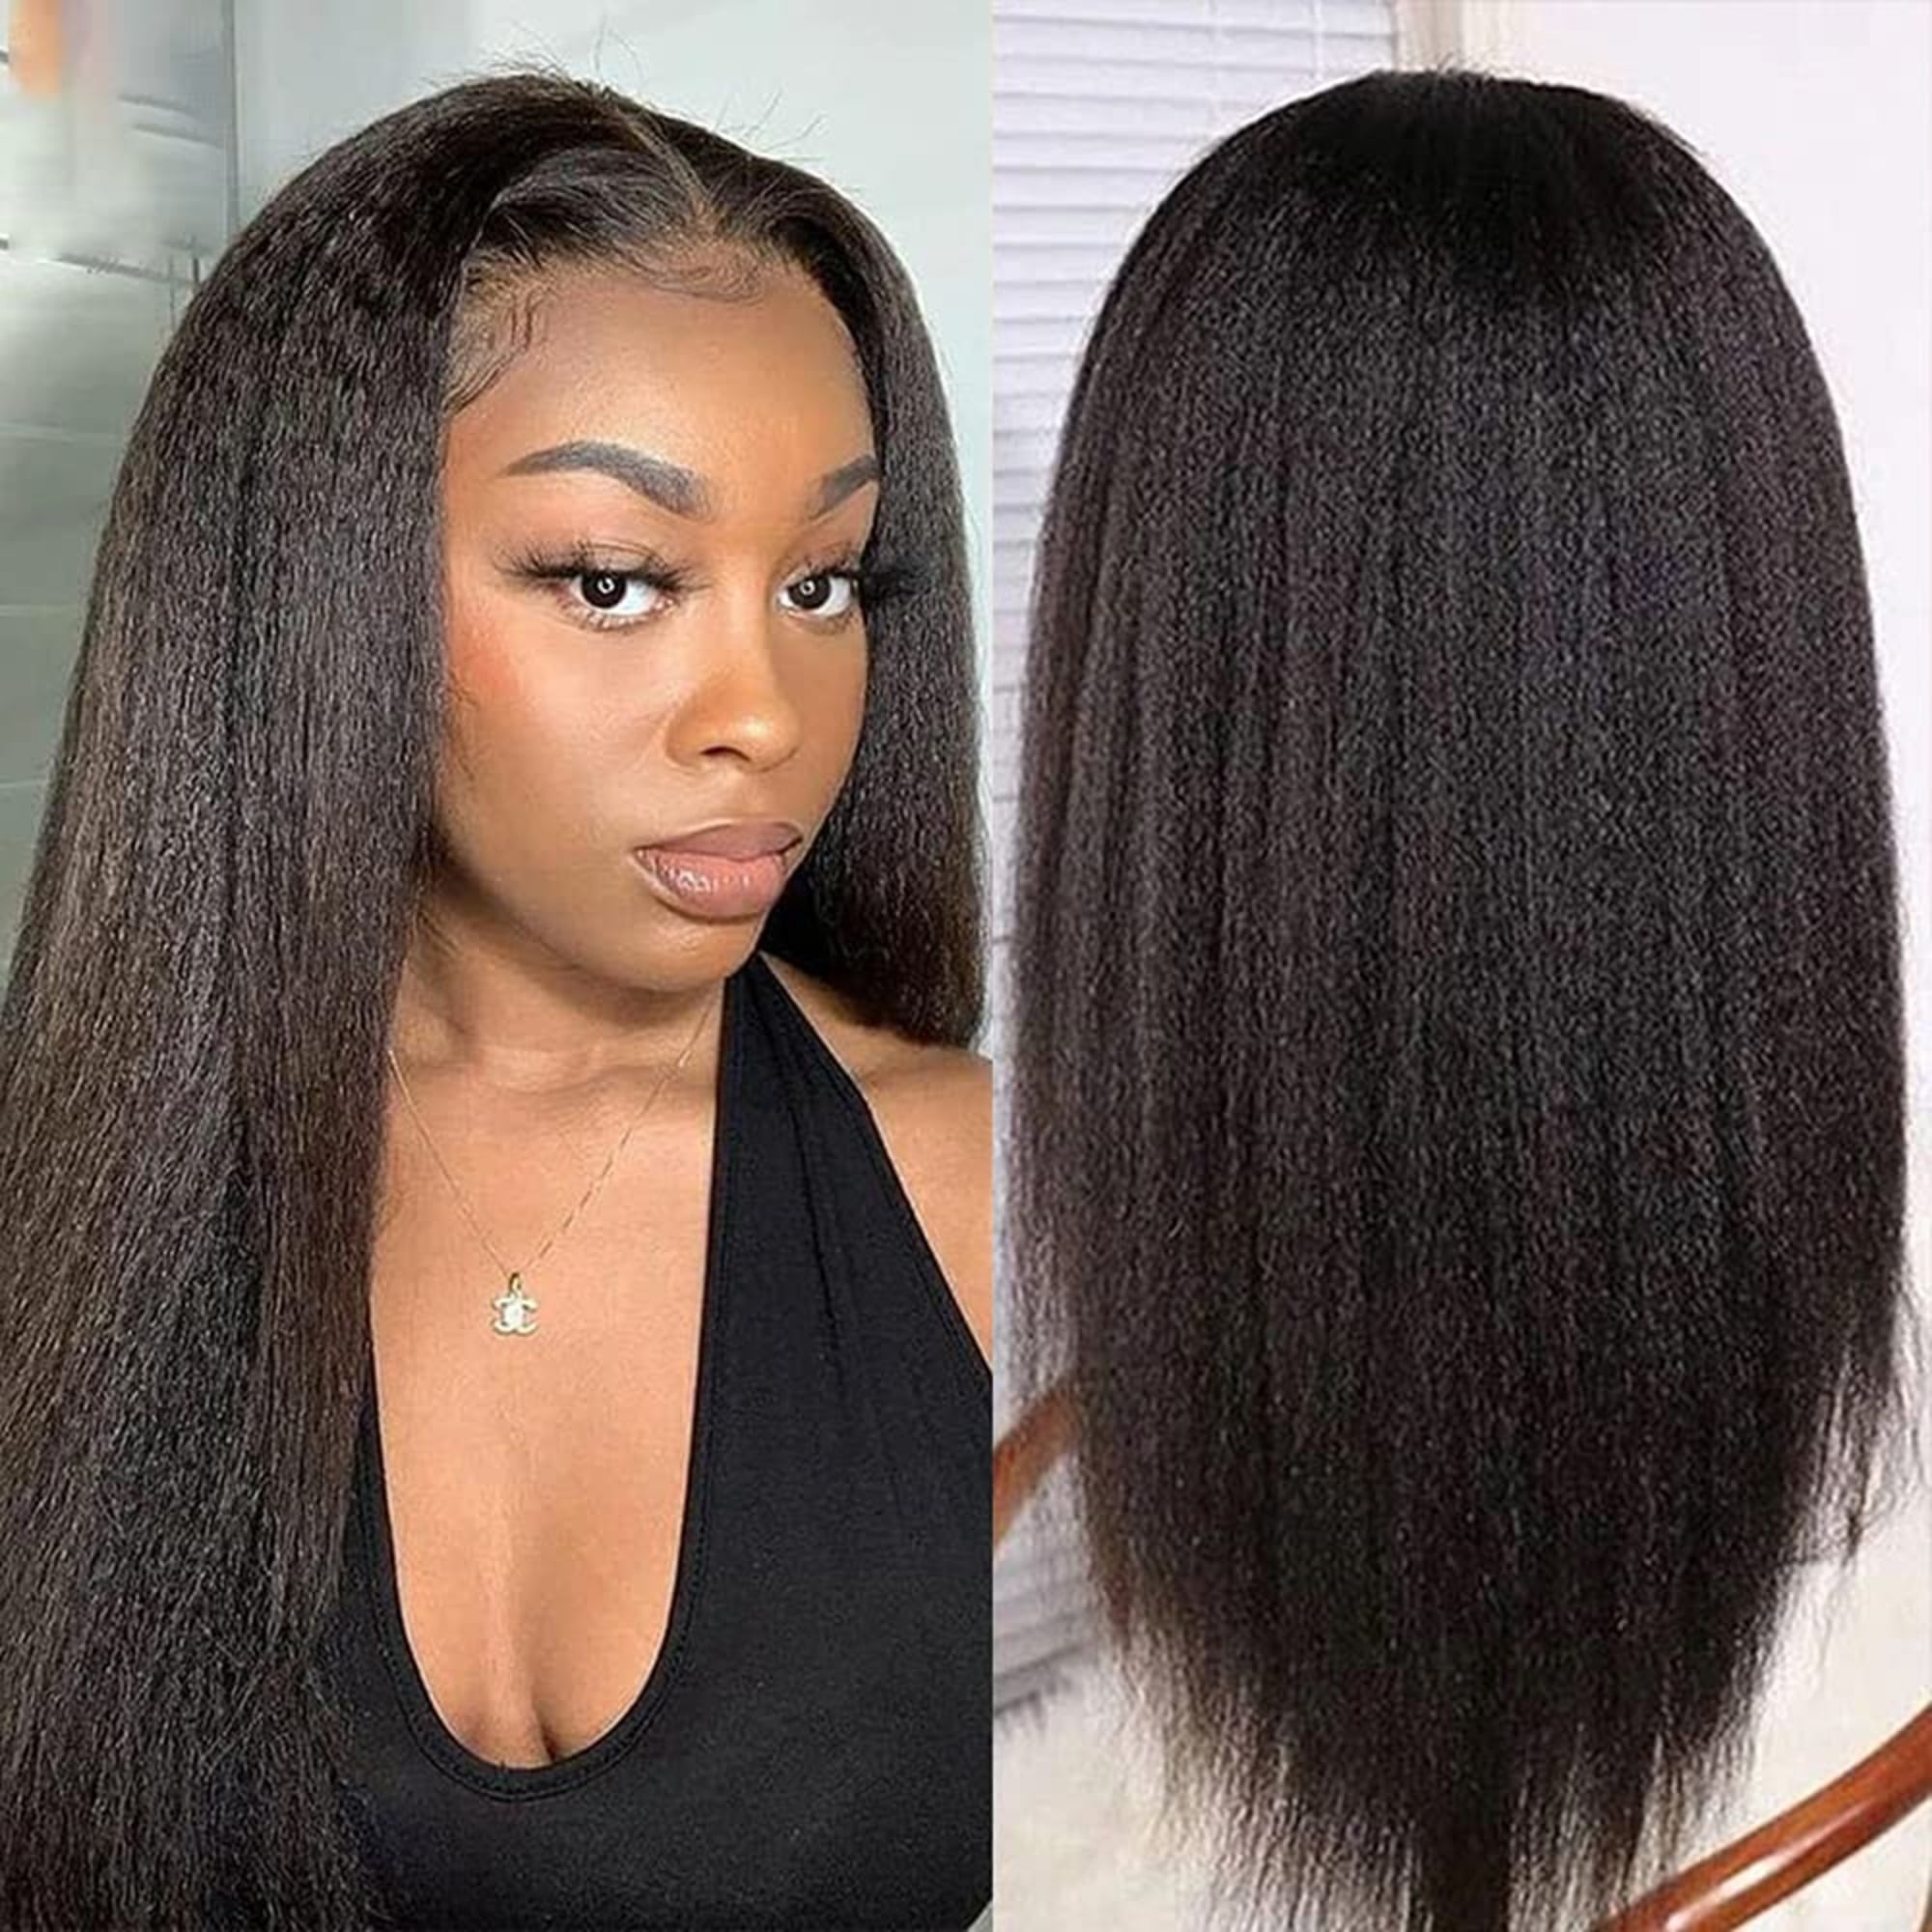 Beauhair 5×5 Kinky Straight Lace Closure Wigs Human Hair Lace Wig Brazilian  Hair Wig 180% Density for Black Women Natural Color 28 inch 